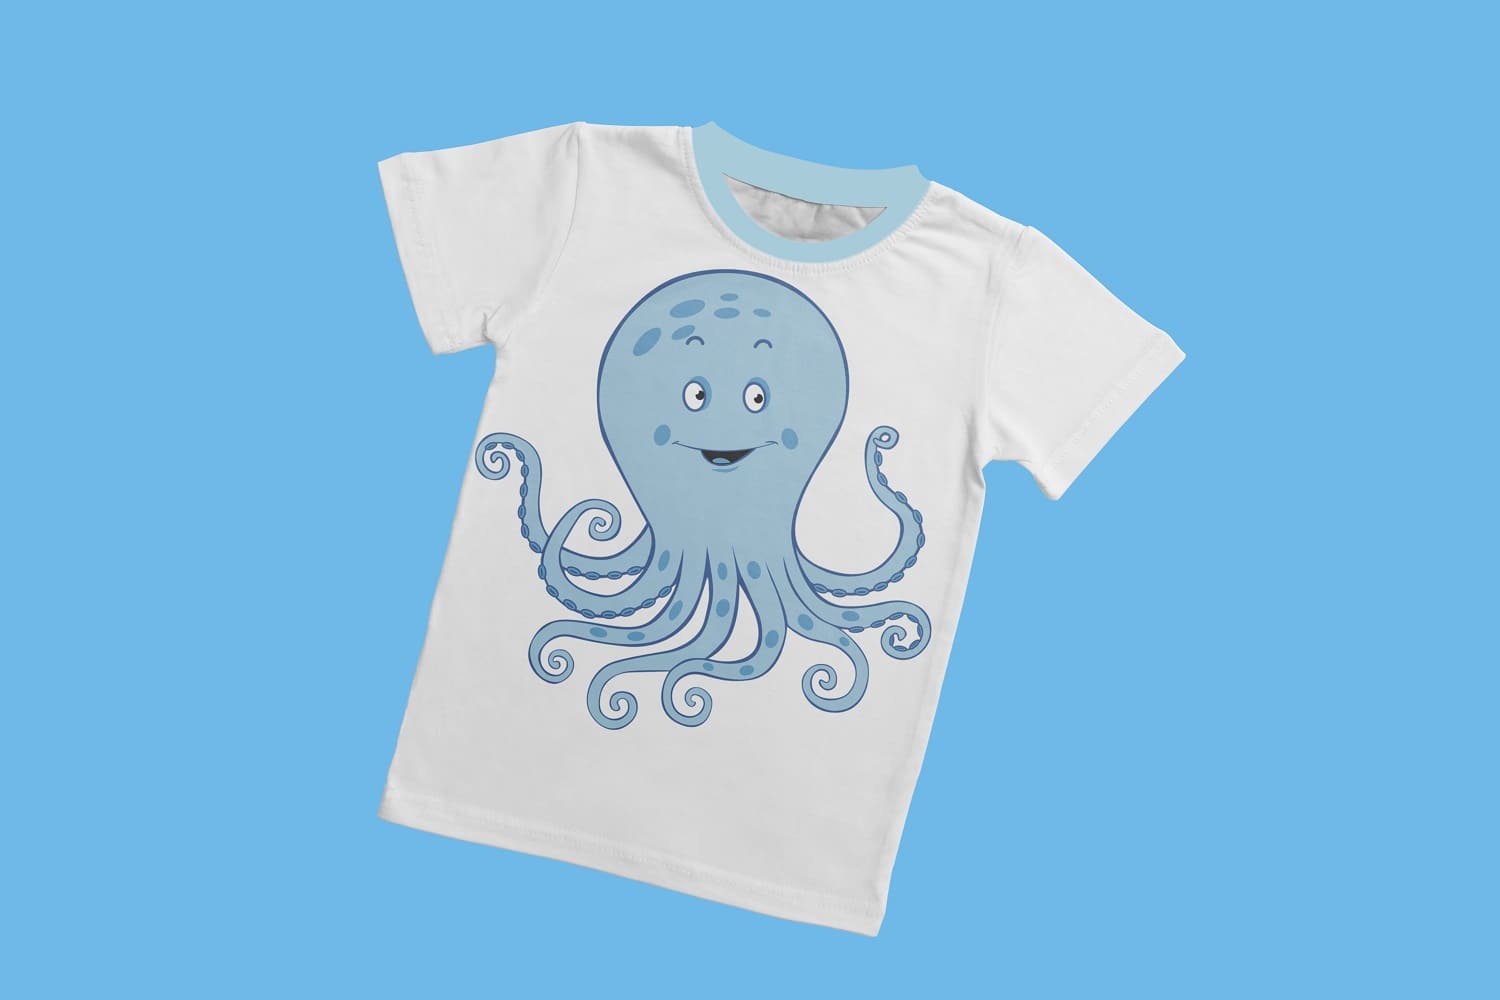 Funny white t-shirt design with a blue octopus on a blue background.